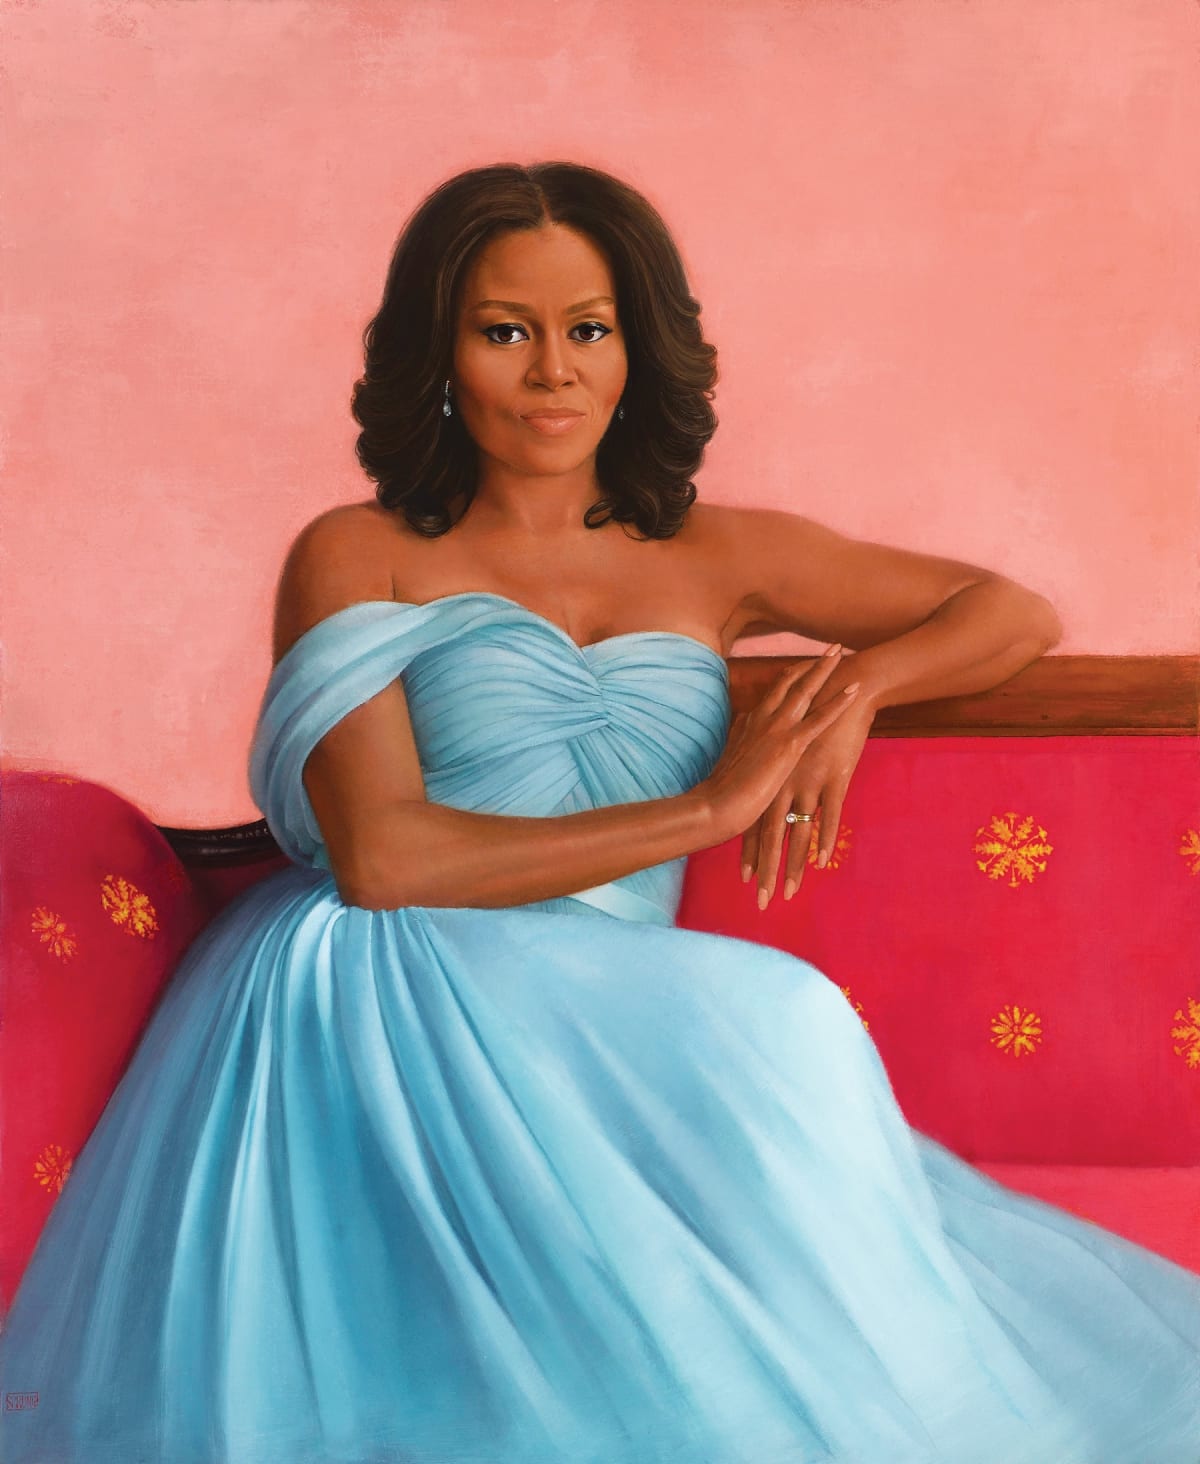 Sharon Sprung’s portrait of First Lady Michelle Obama unveiled at the White House